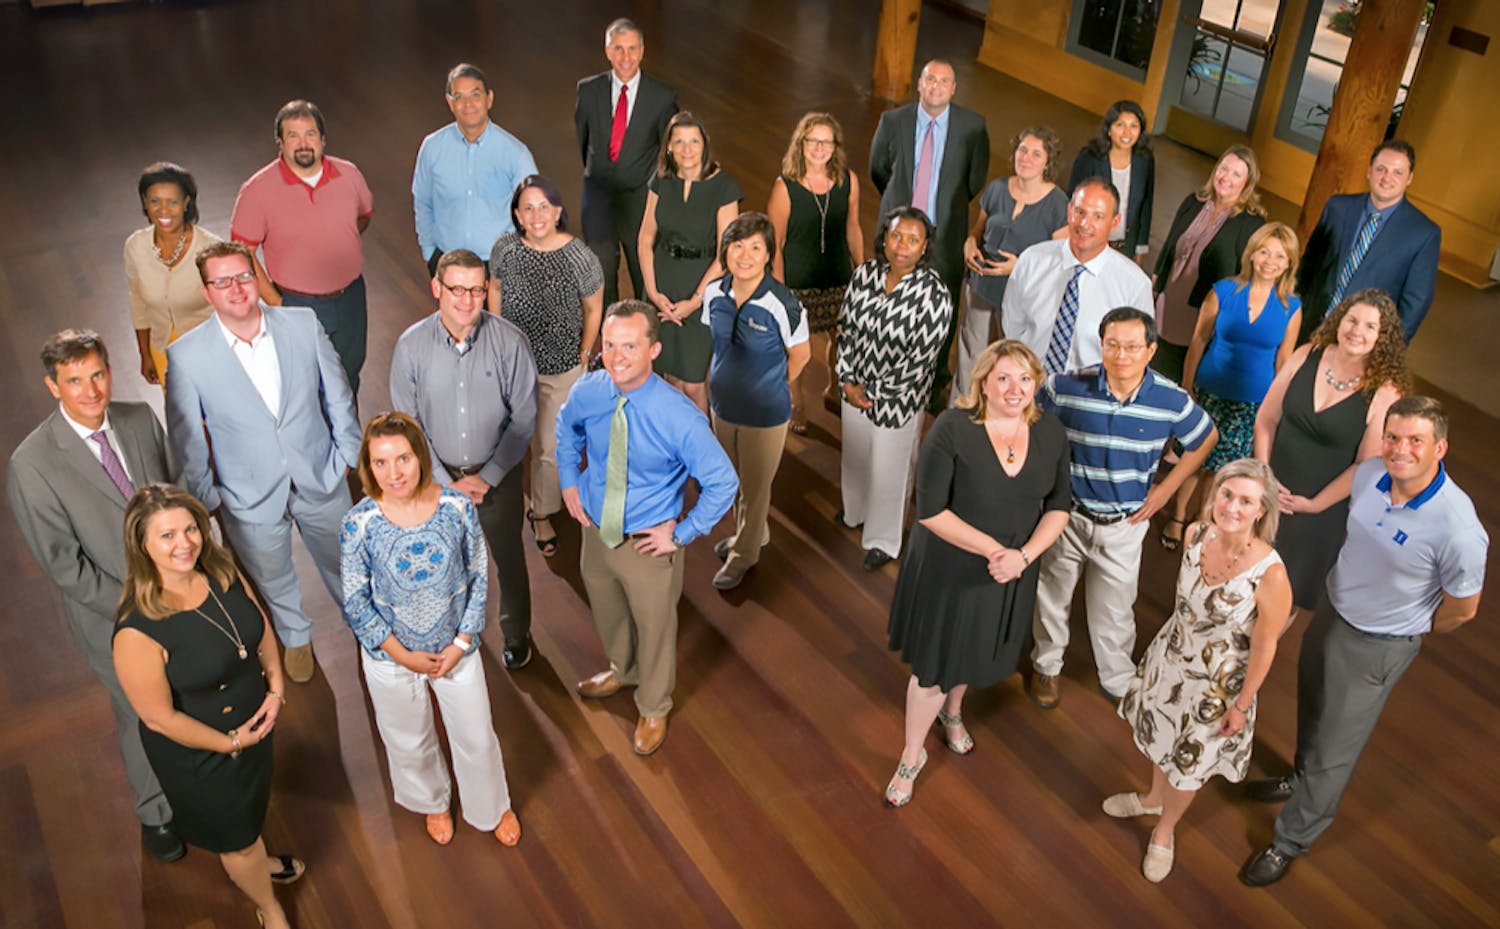 The 26 participants of the Duke Leadership Academy included employees in the Divinity School, Duke Athletics and the Law School, among others.&nbsp;